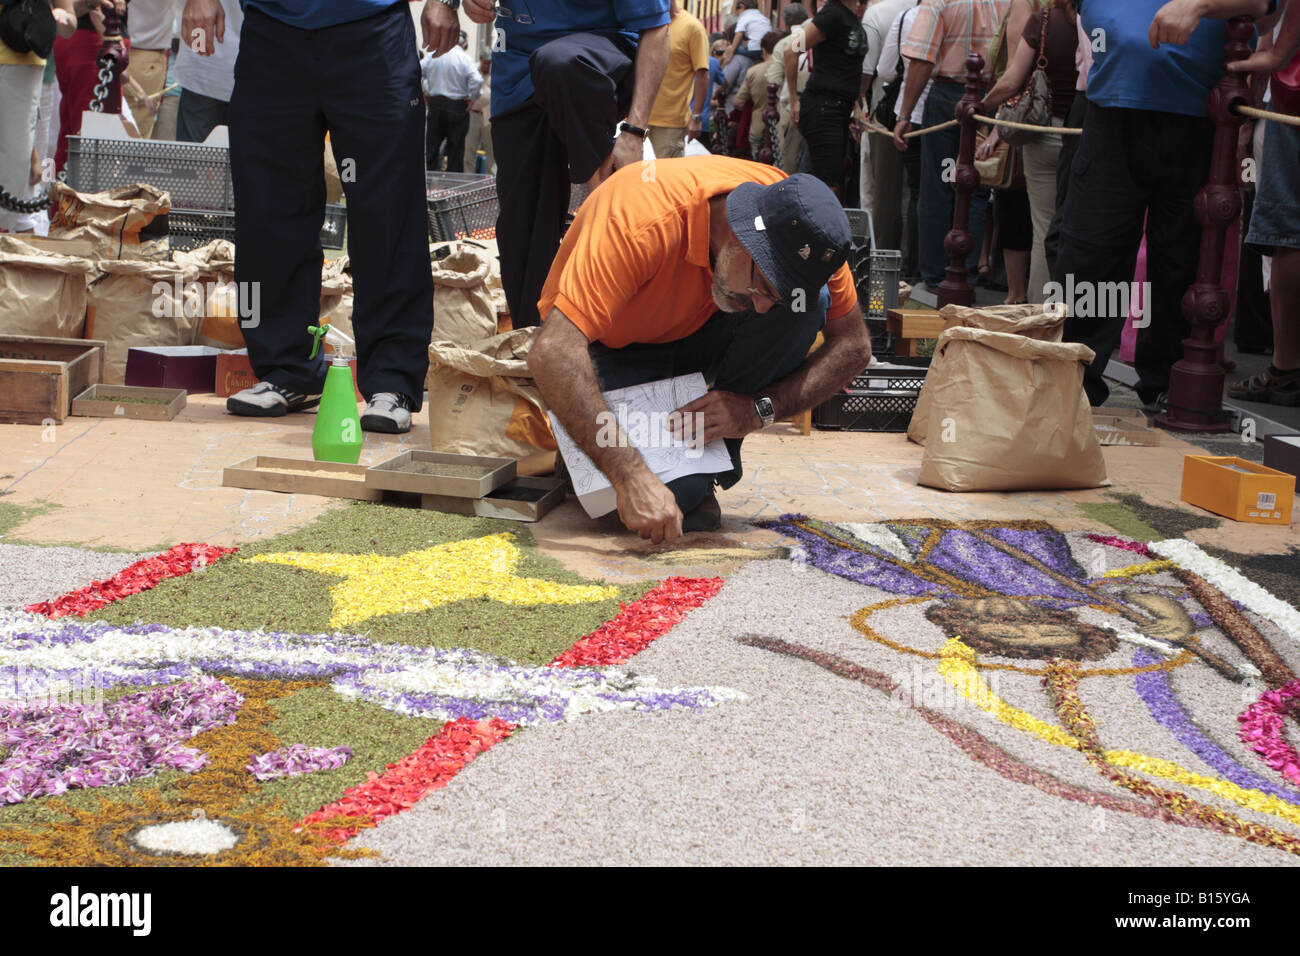 An alfombrista concentrating hard making the flower carpets from petals seeds and volcanic sand to celebrate Corpus Christi in La Oratava, Tenerife Stock Photo